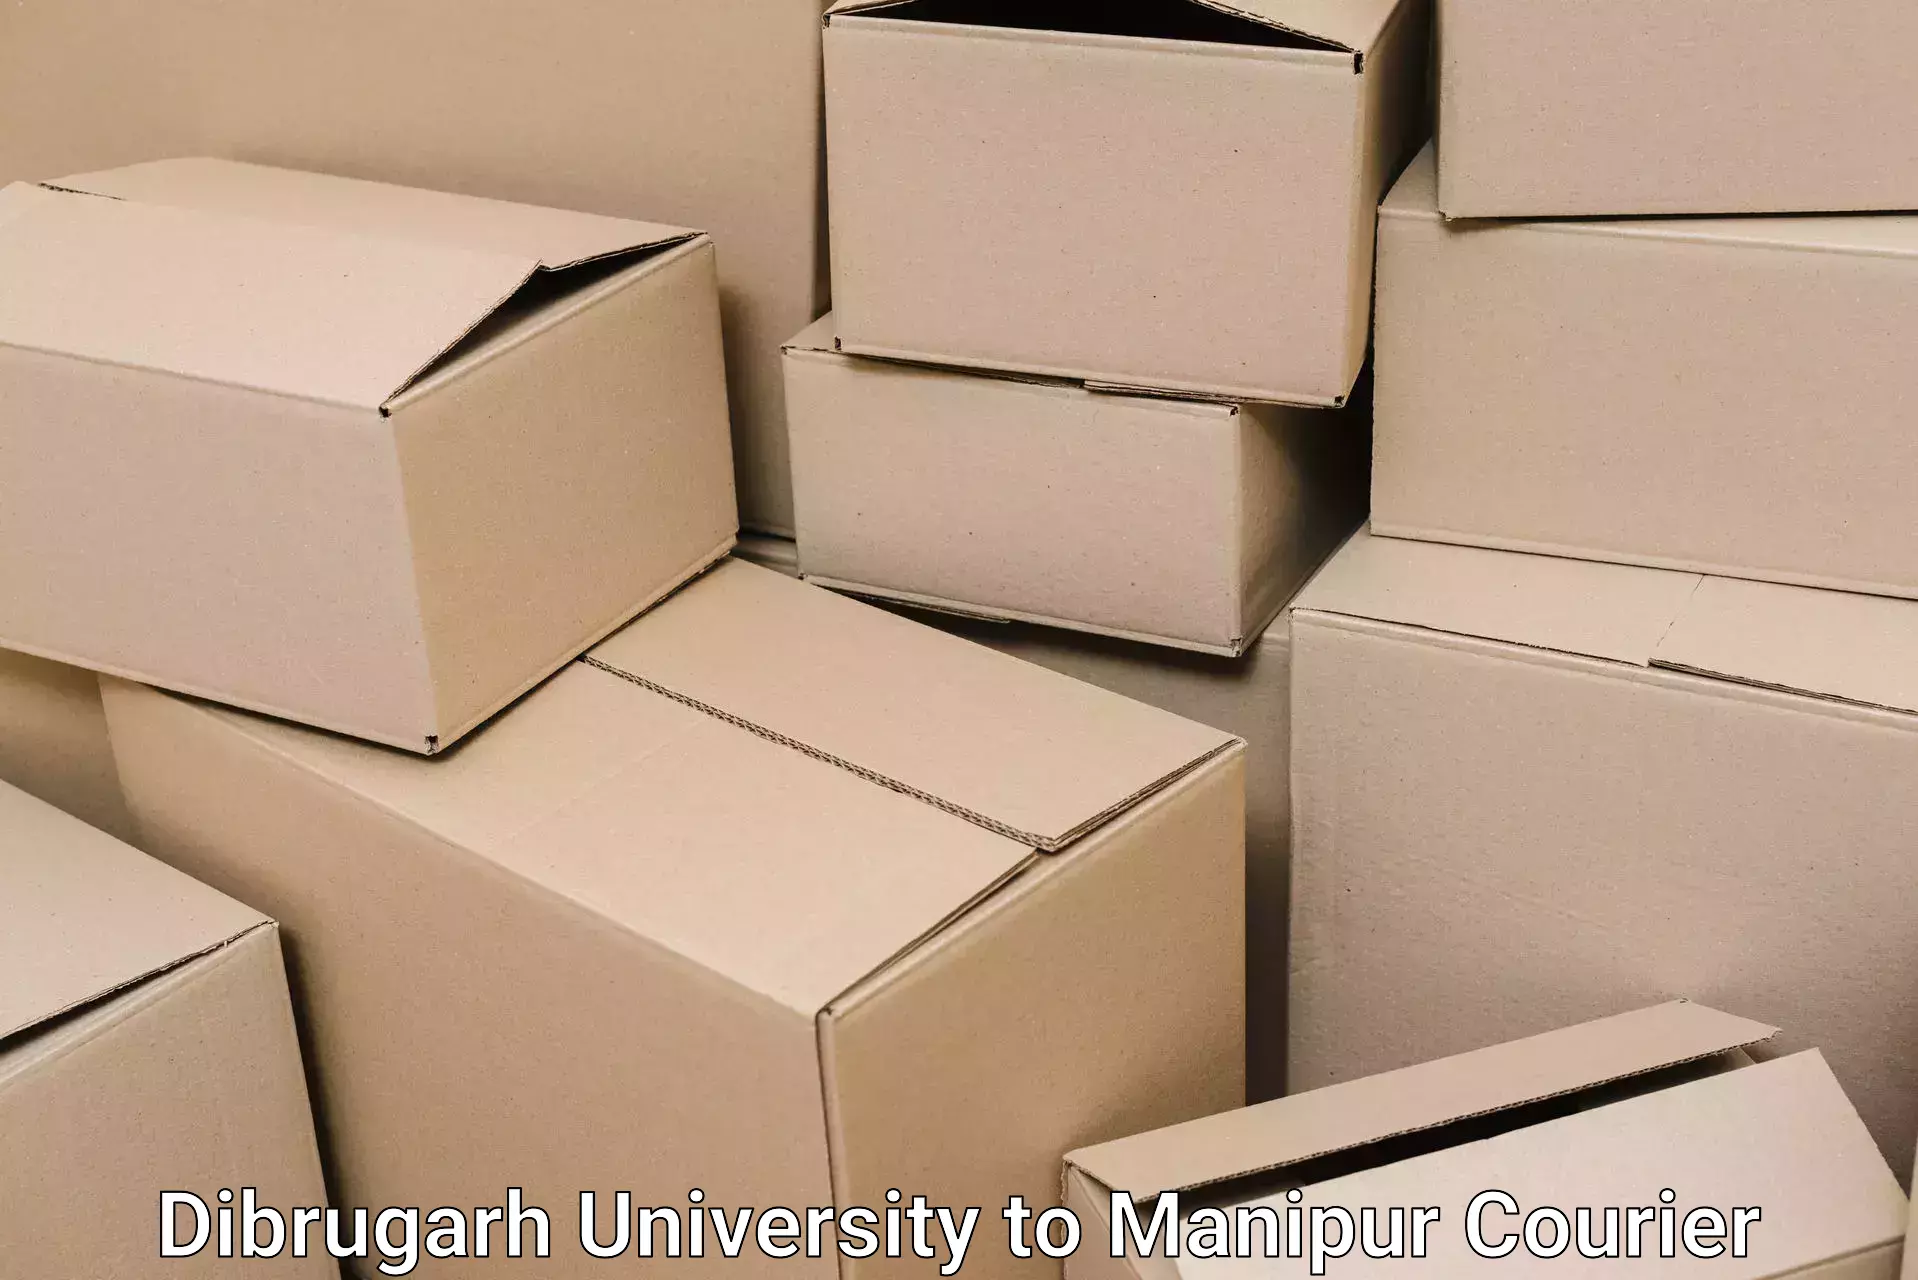 Professional movers and packers Dibrugarh University to Manipur